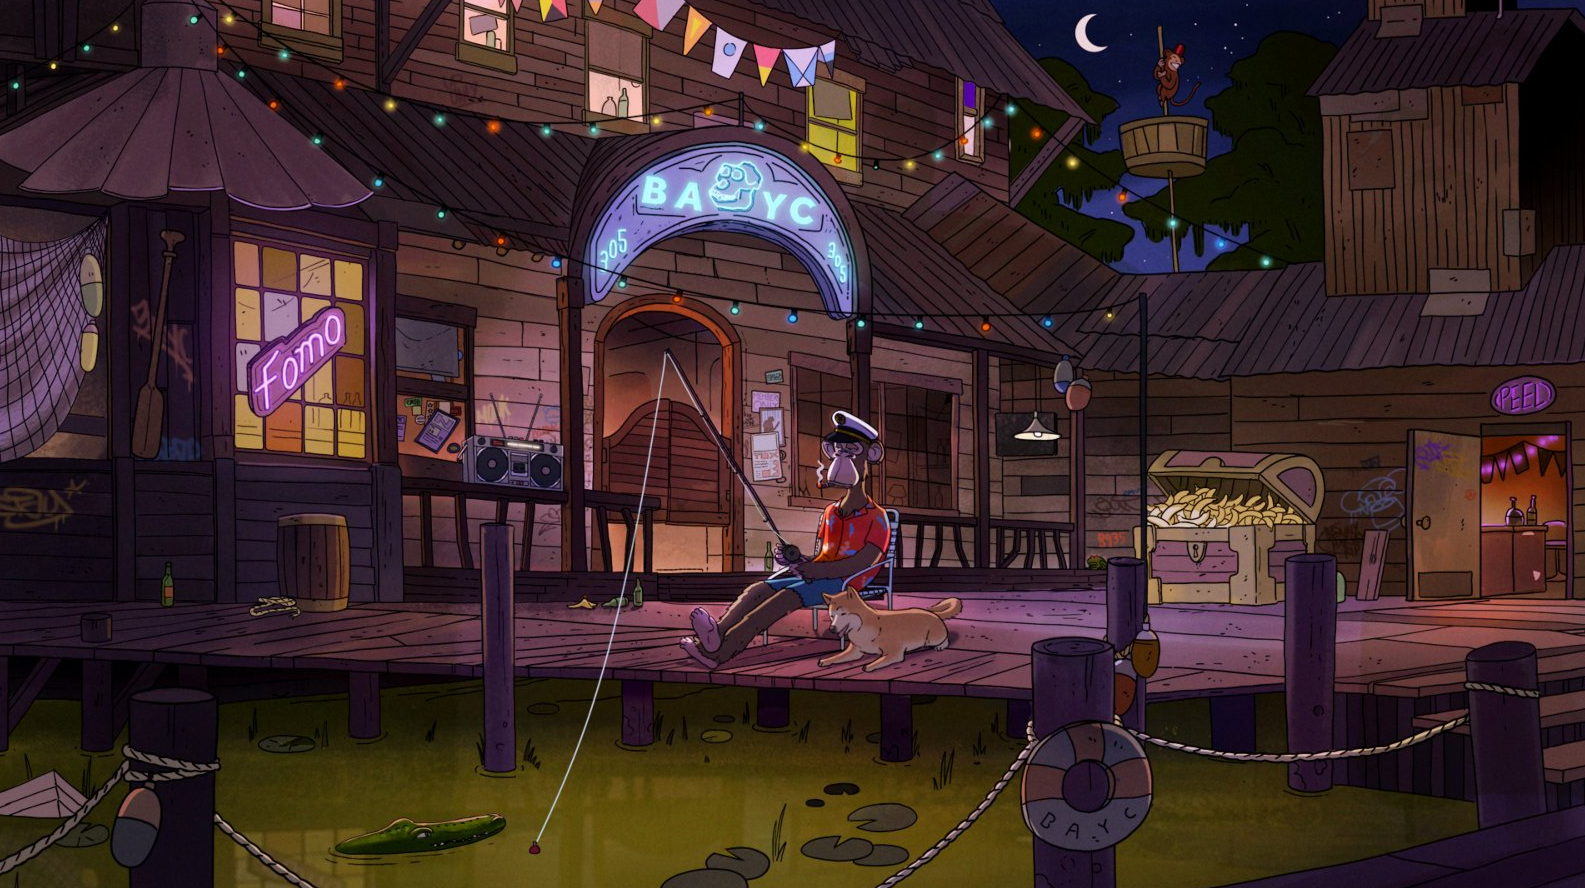 Bored Ape Yacht Club's Metaverse Otherside will release a demo on July 16